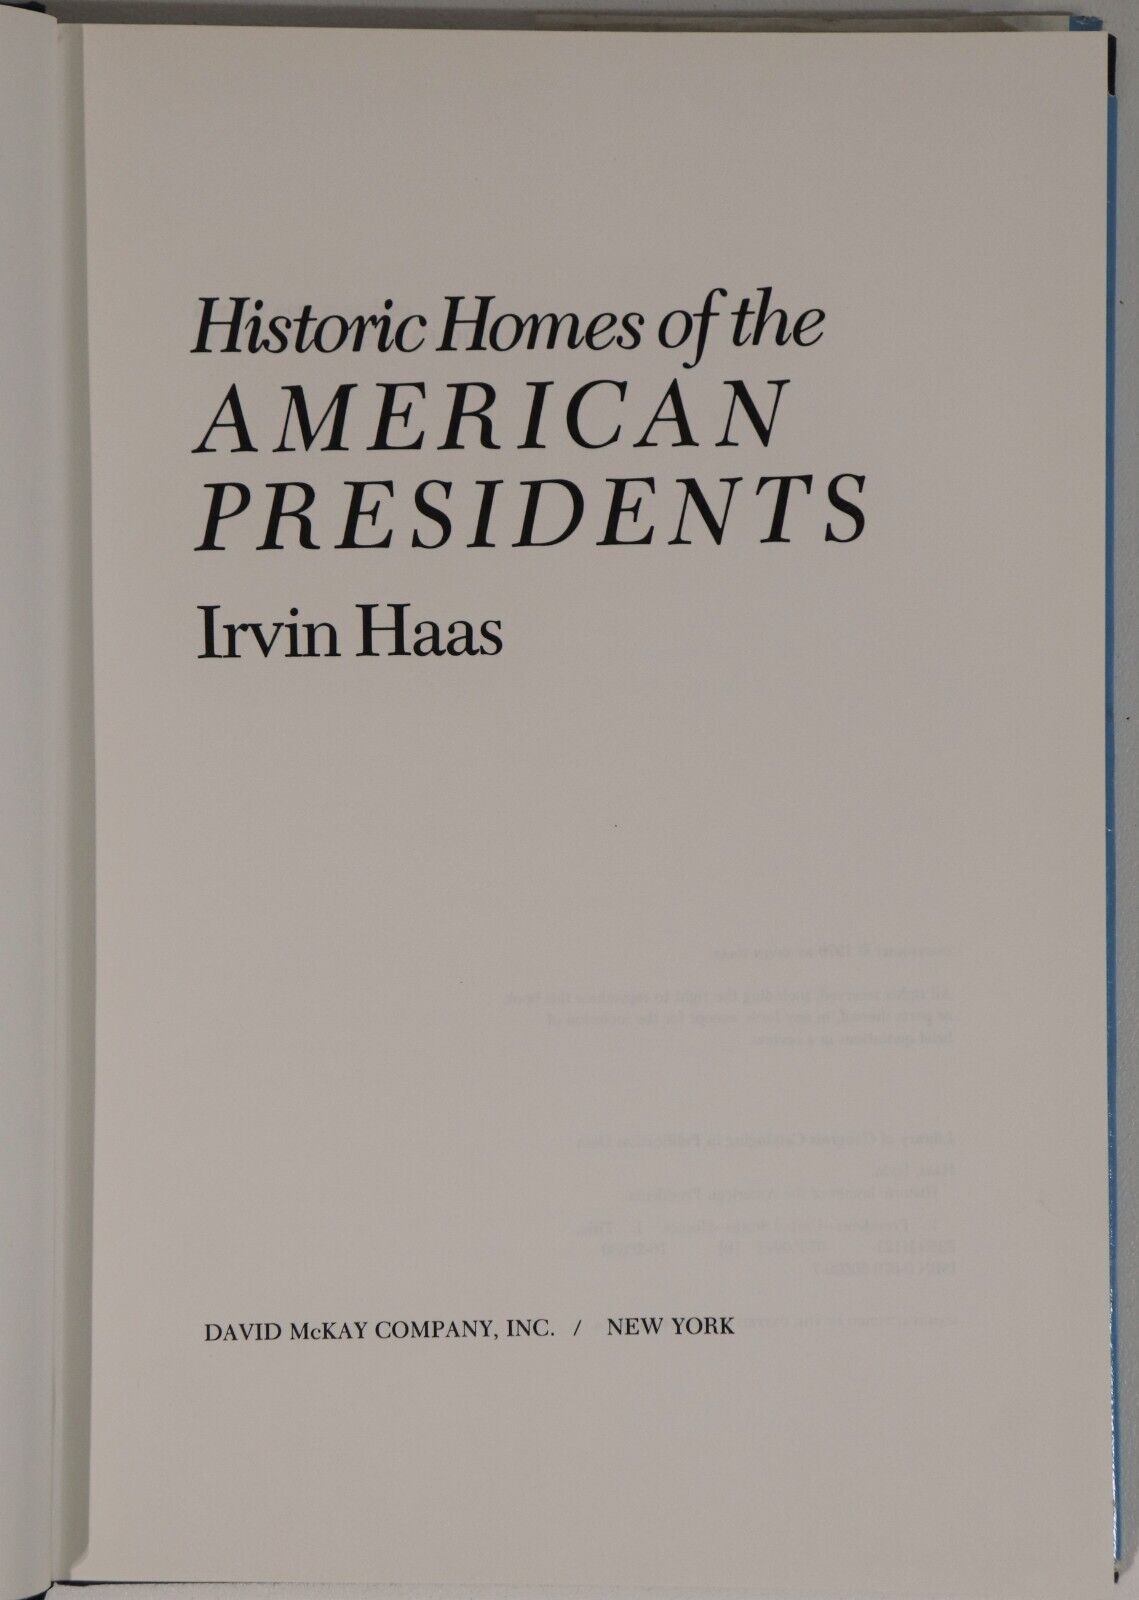 Historic Homes Of The American Presidents - 1976 - American Architecture Book - 0